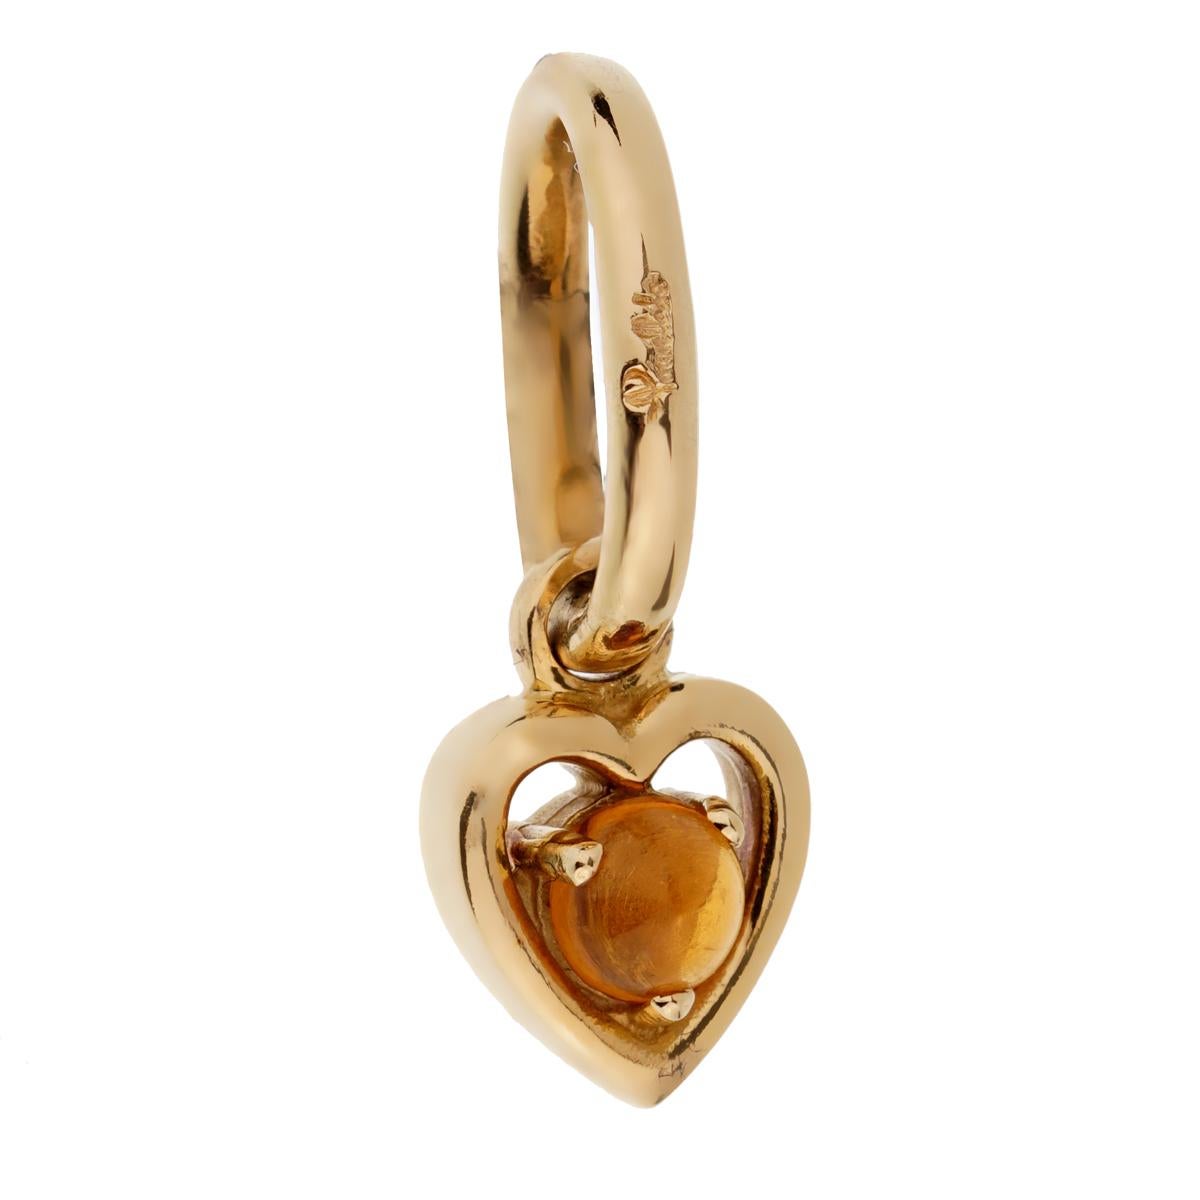 A chic brand new Pomellato charm pendant featuring a .30ct citrine set in 18k yellow gold. 

Sku: 2217